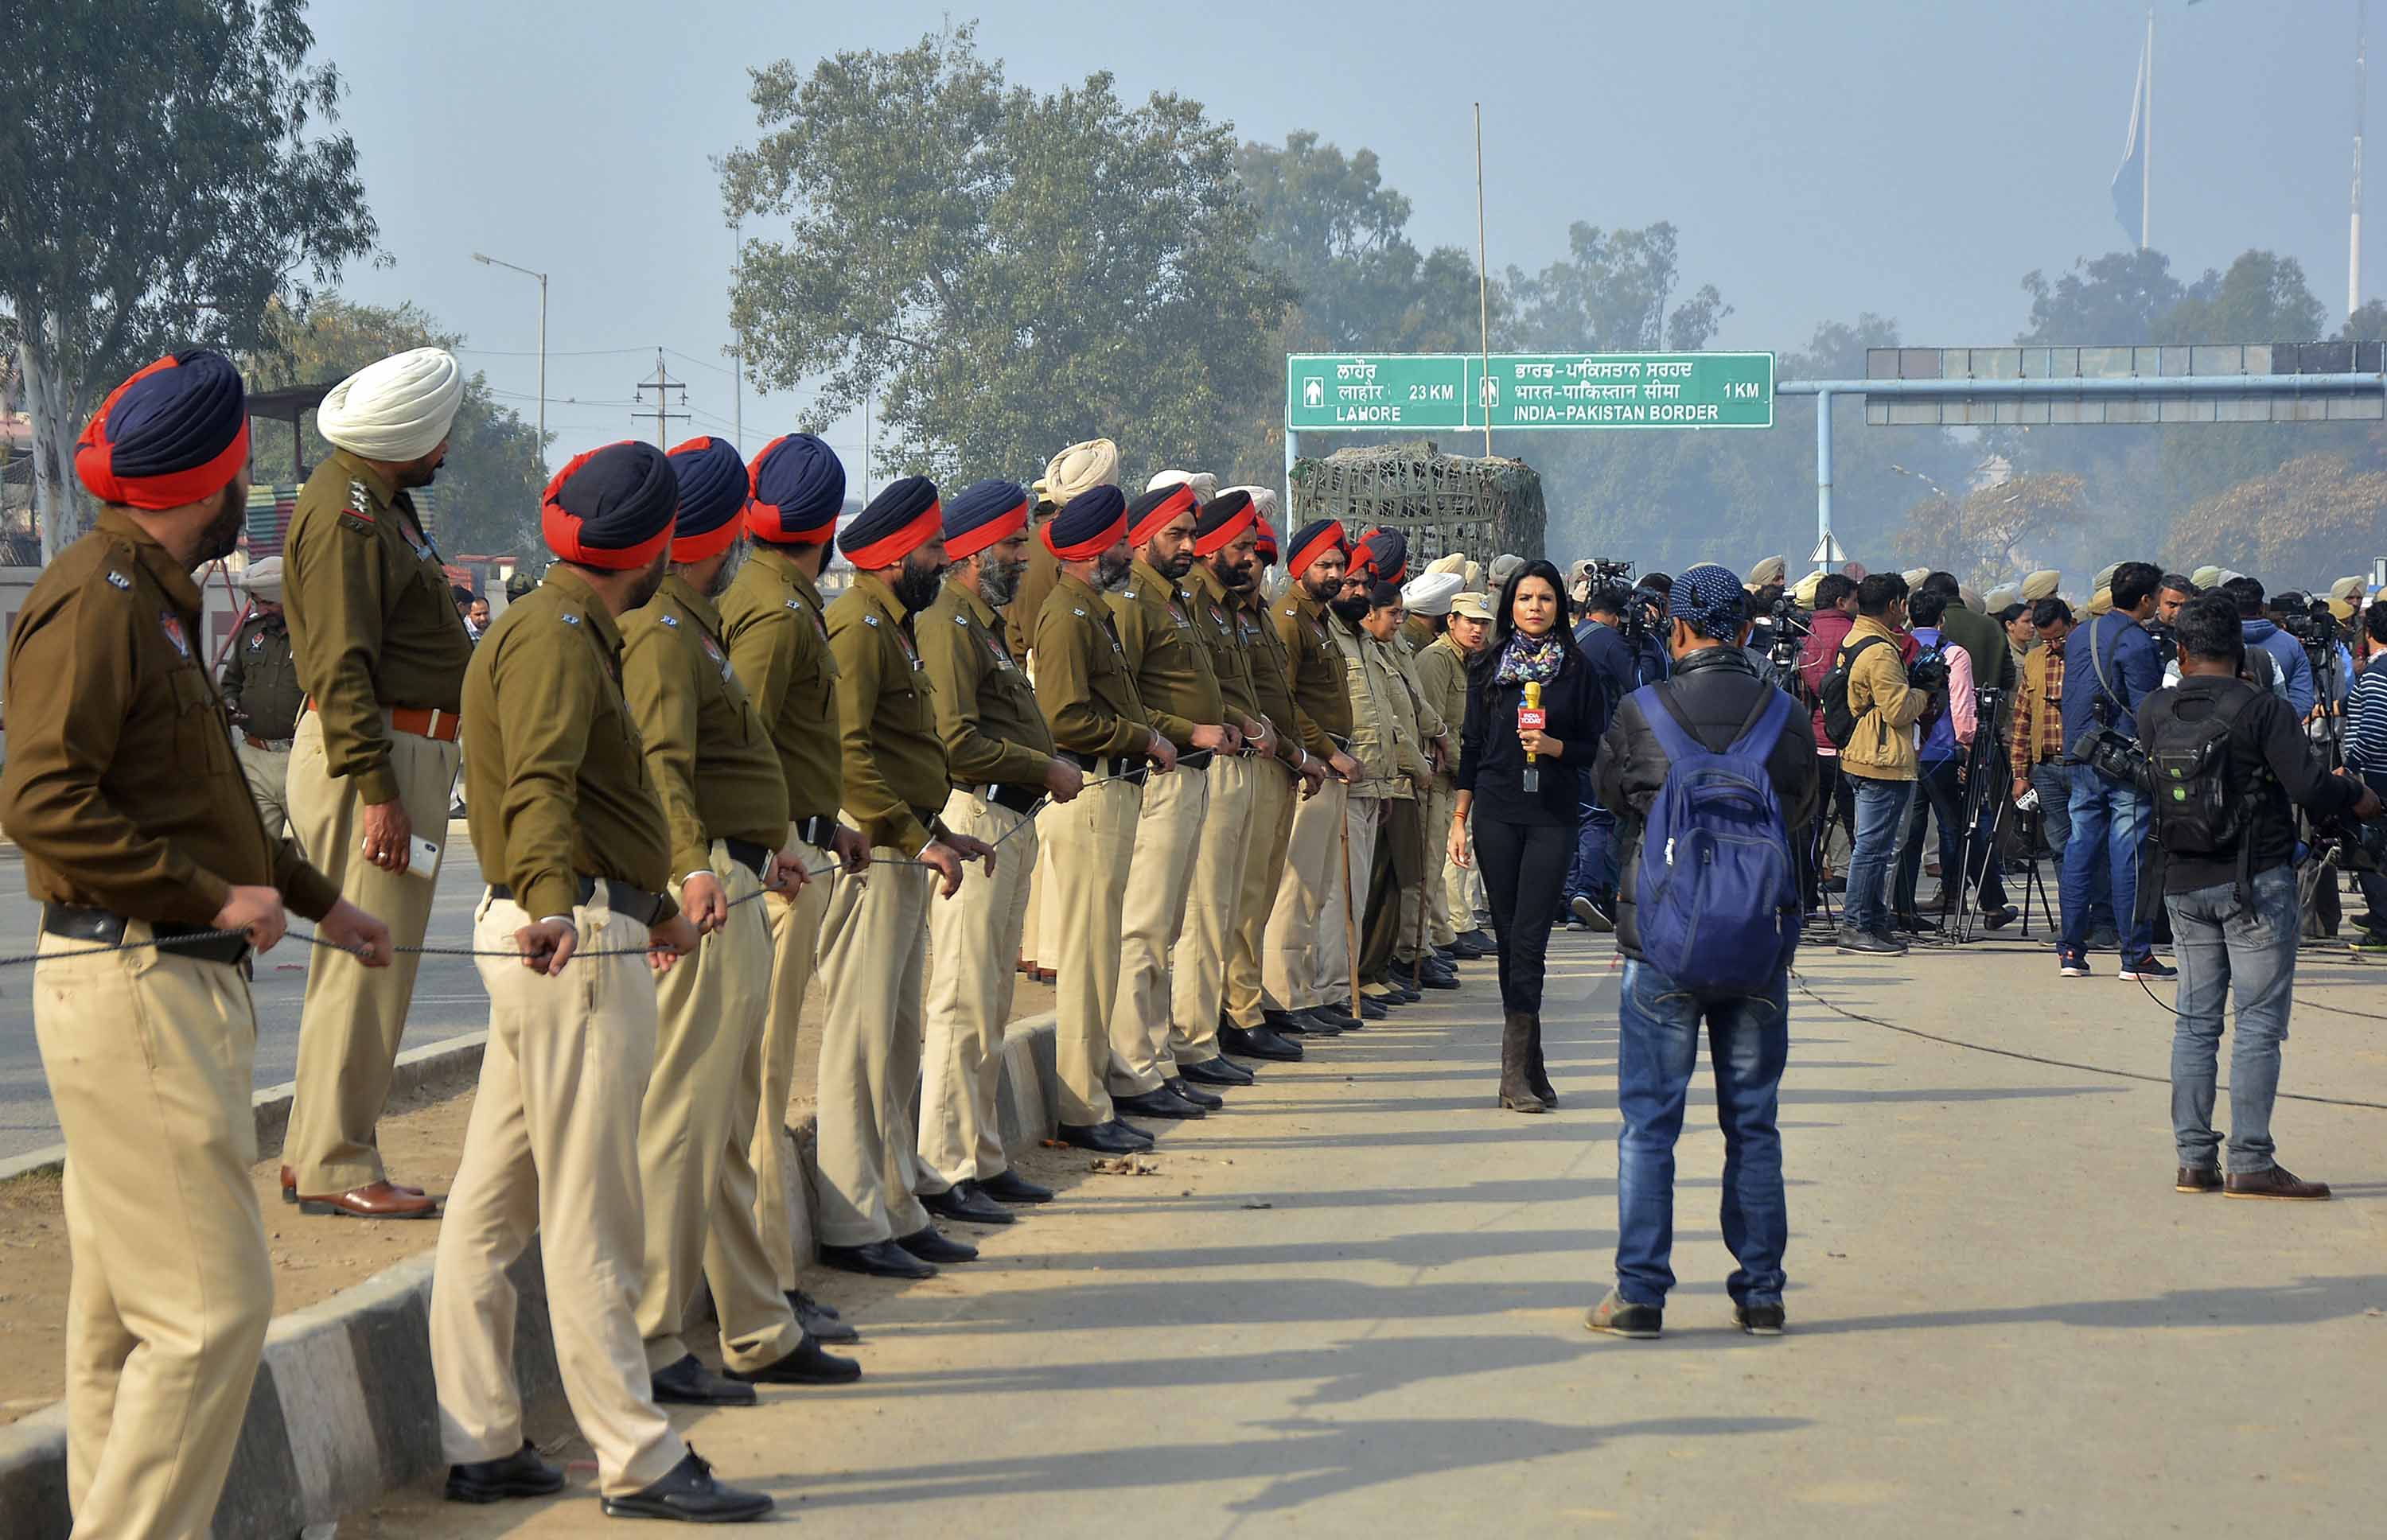 Officers await the return of the Indian pilot on the Indian side of the Wagah border crossing on Friday, March 1.